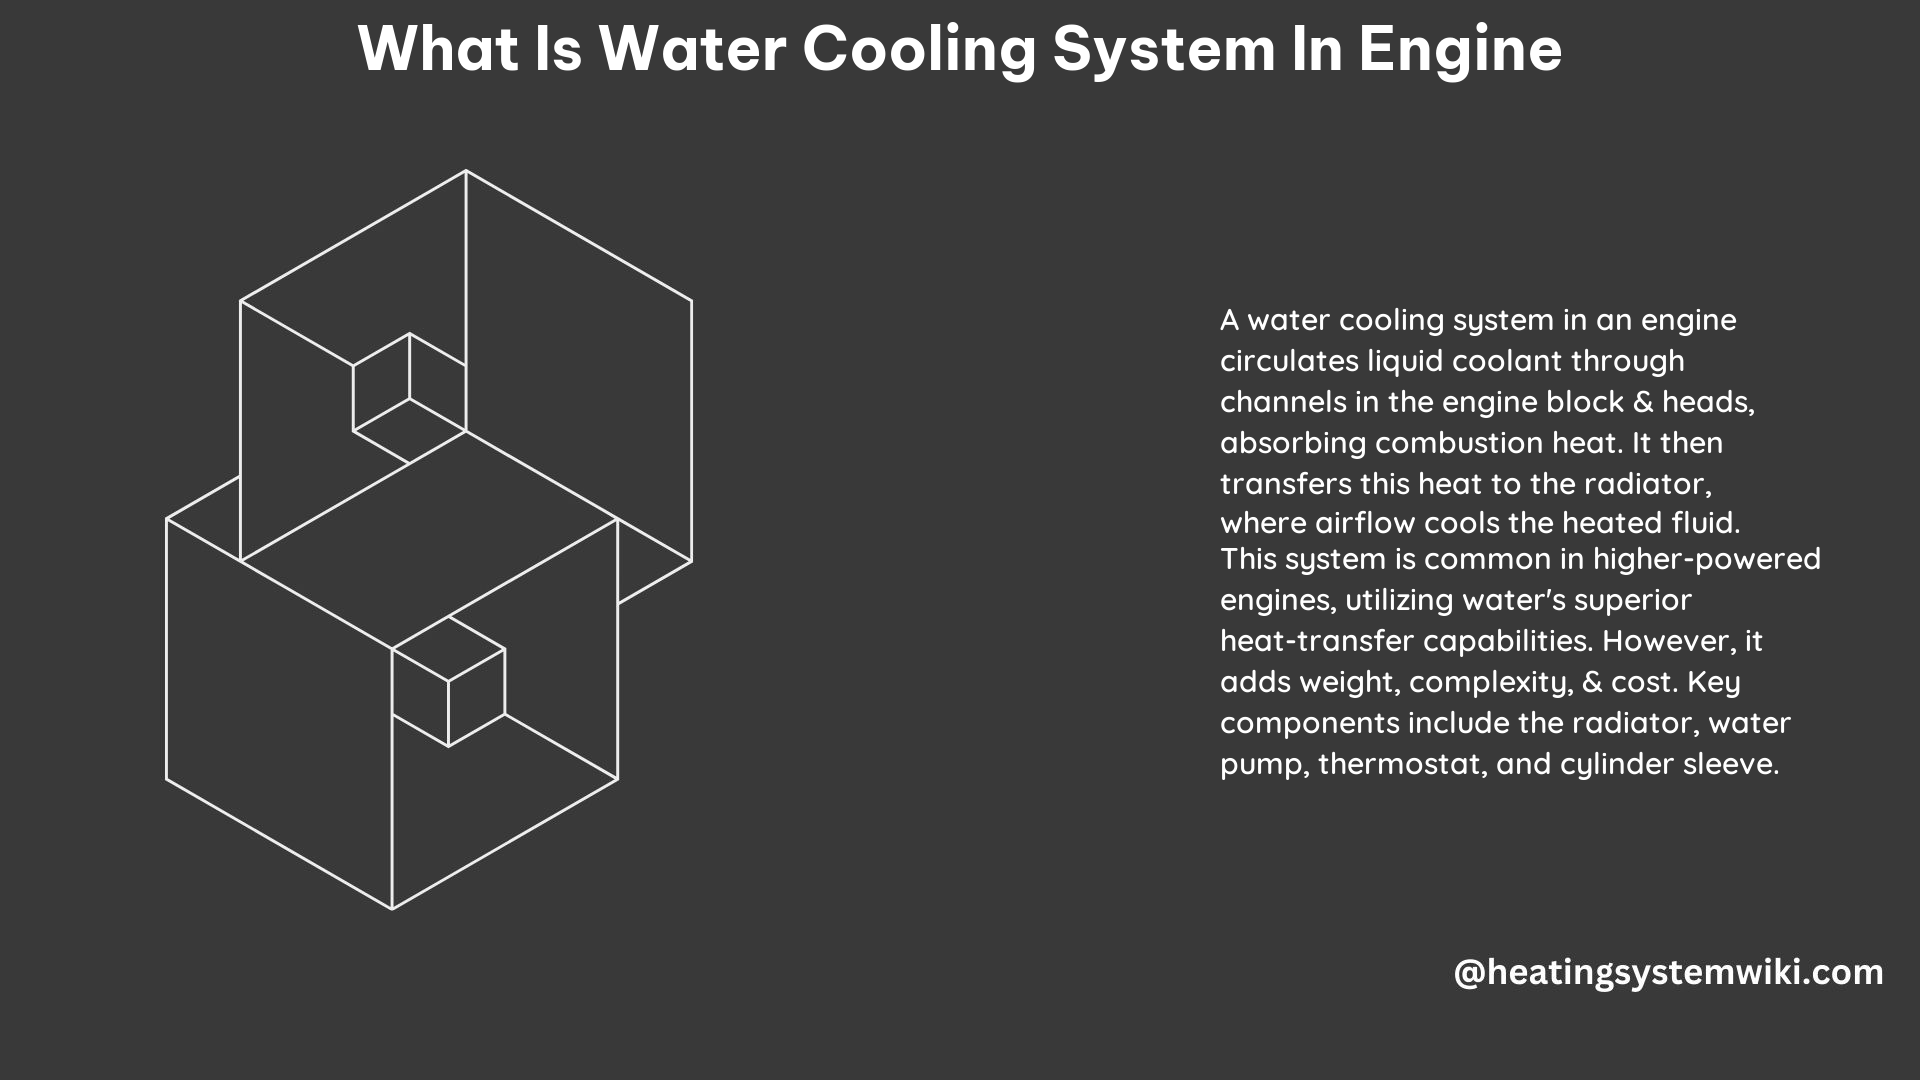 What Is Water Cooling System in Engine